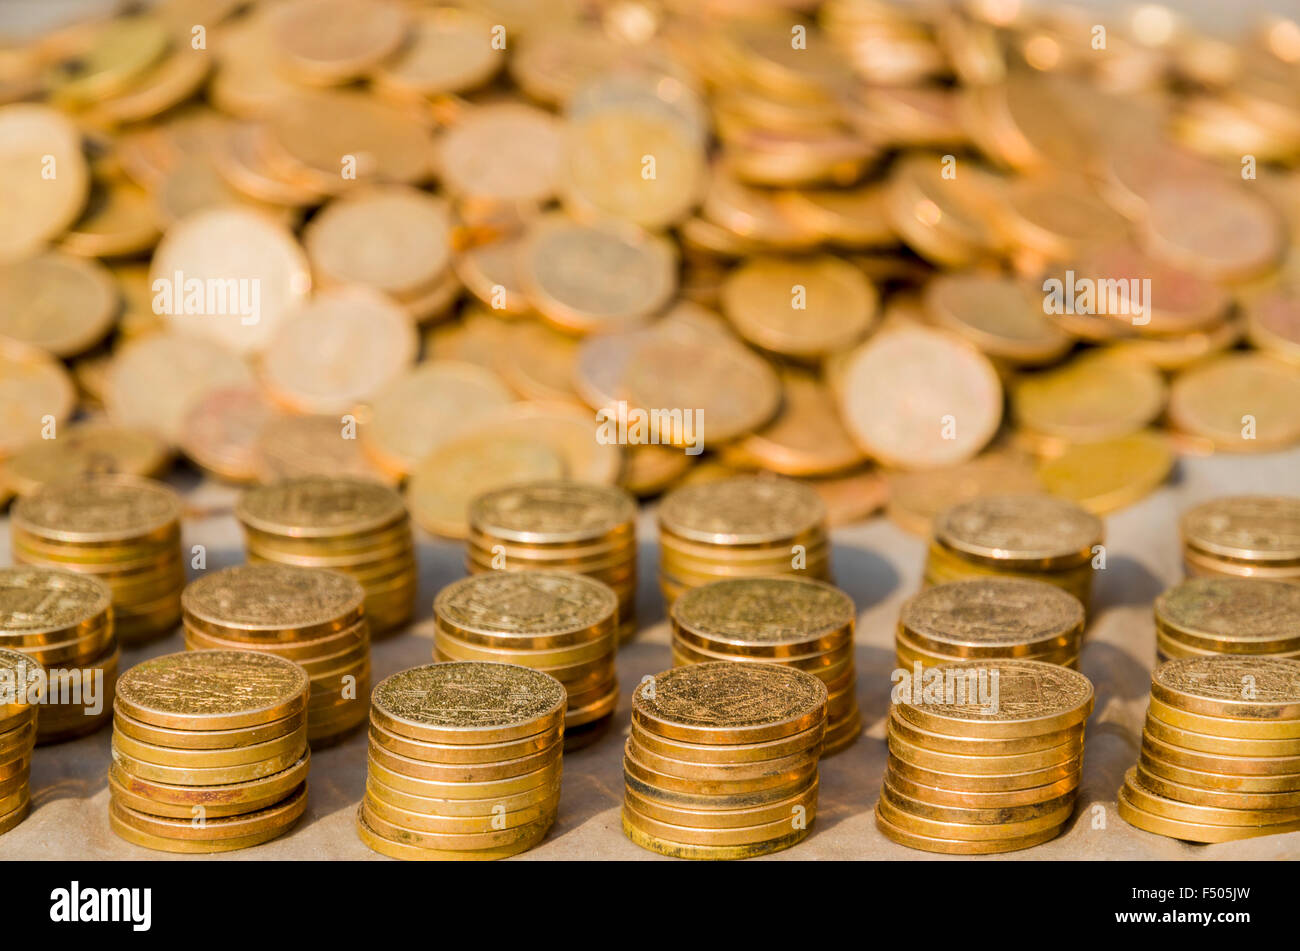 Many nepali coins piling up Stock Photo